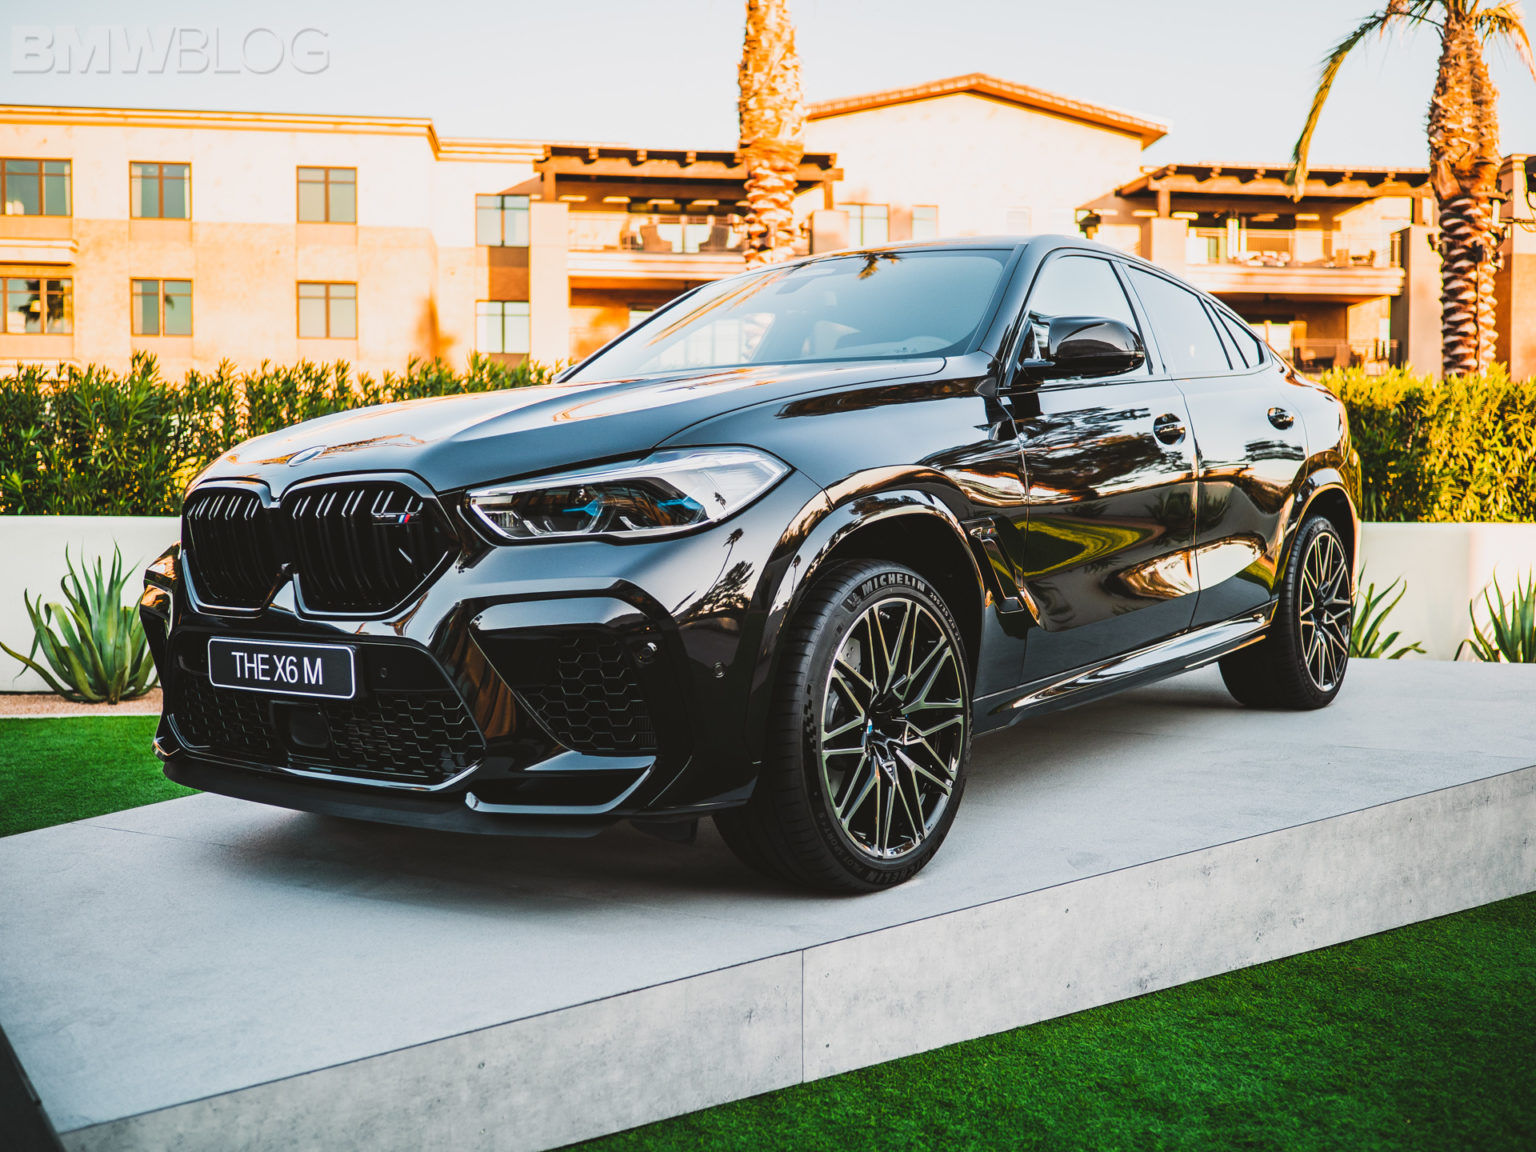 2020 BMW X6 M Competition in Carbon Black Metallic – EXCLUSIVE PHOTOS